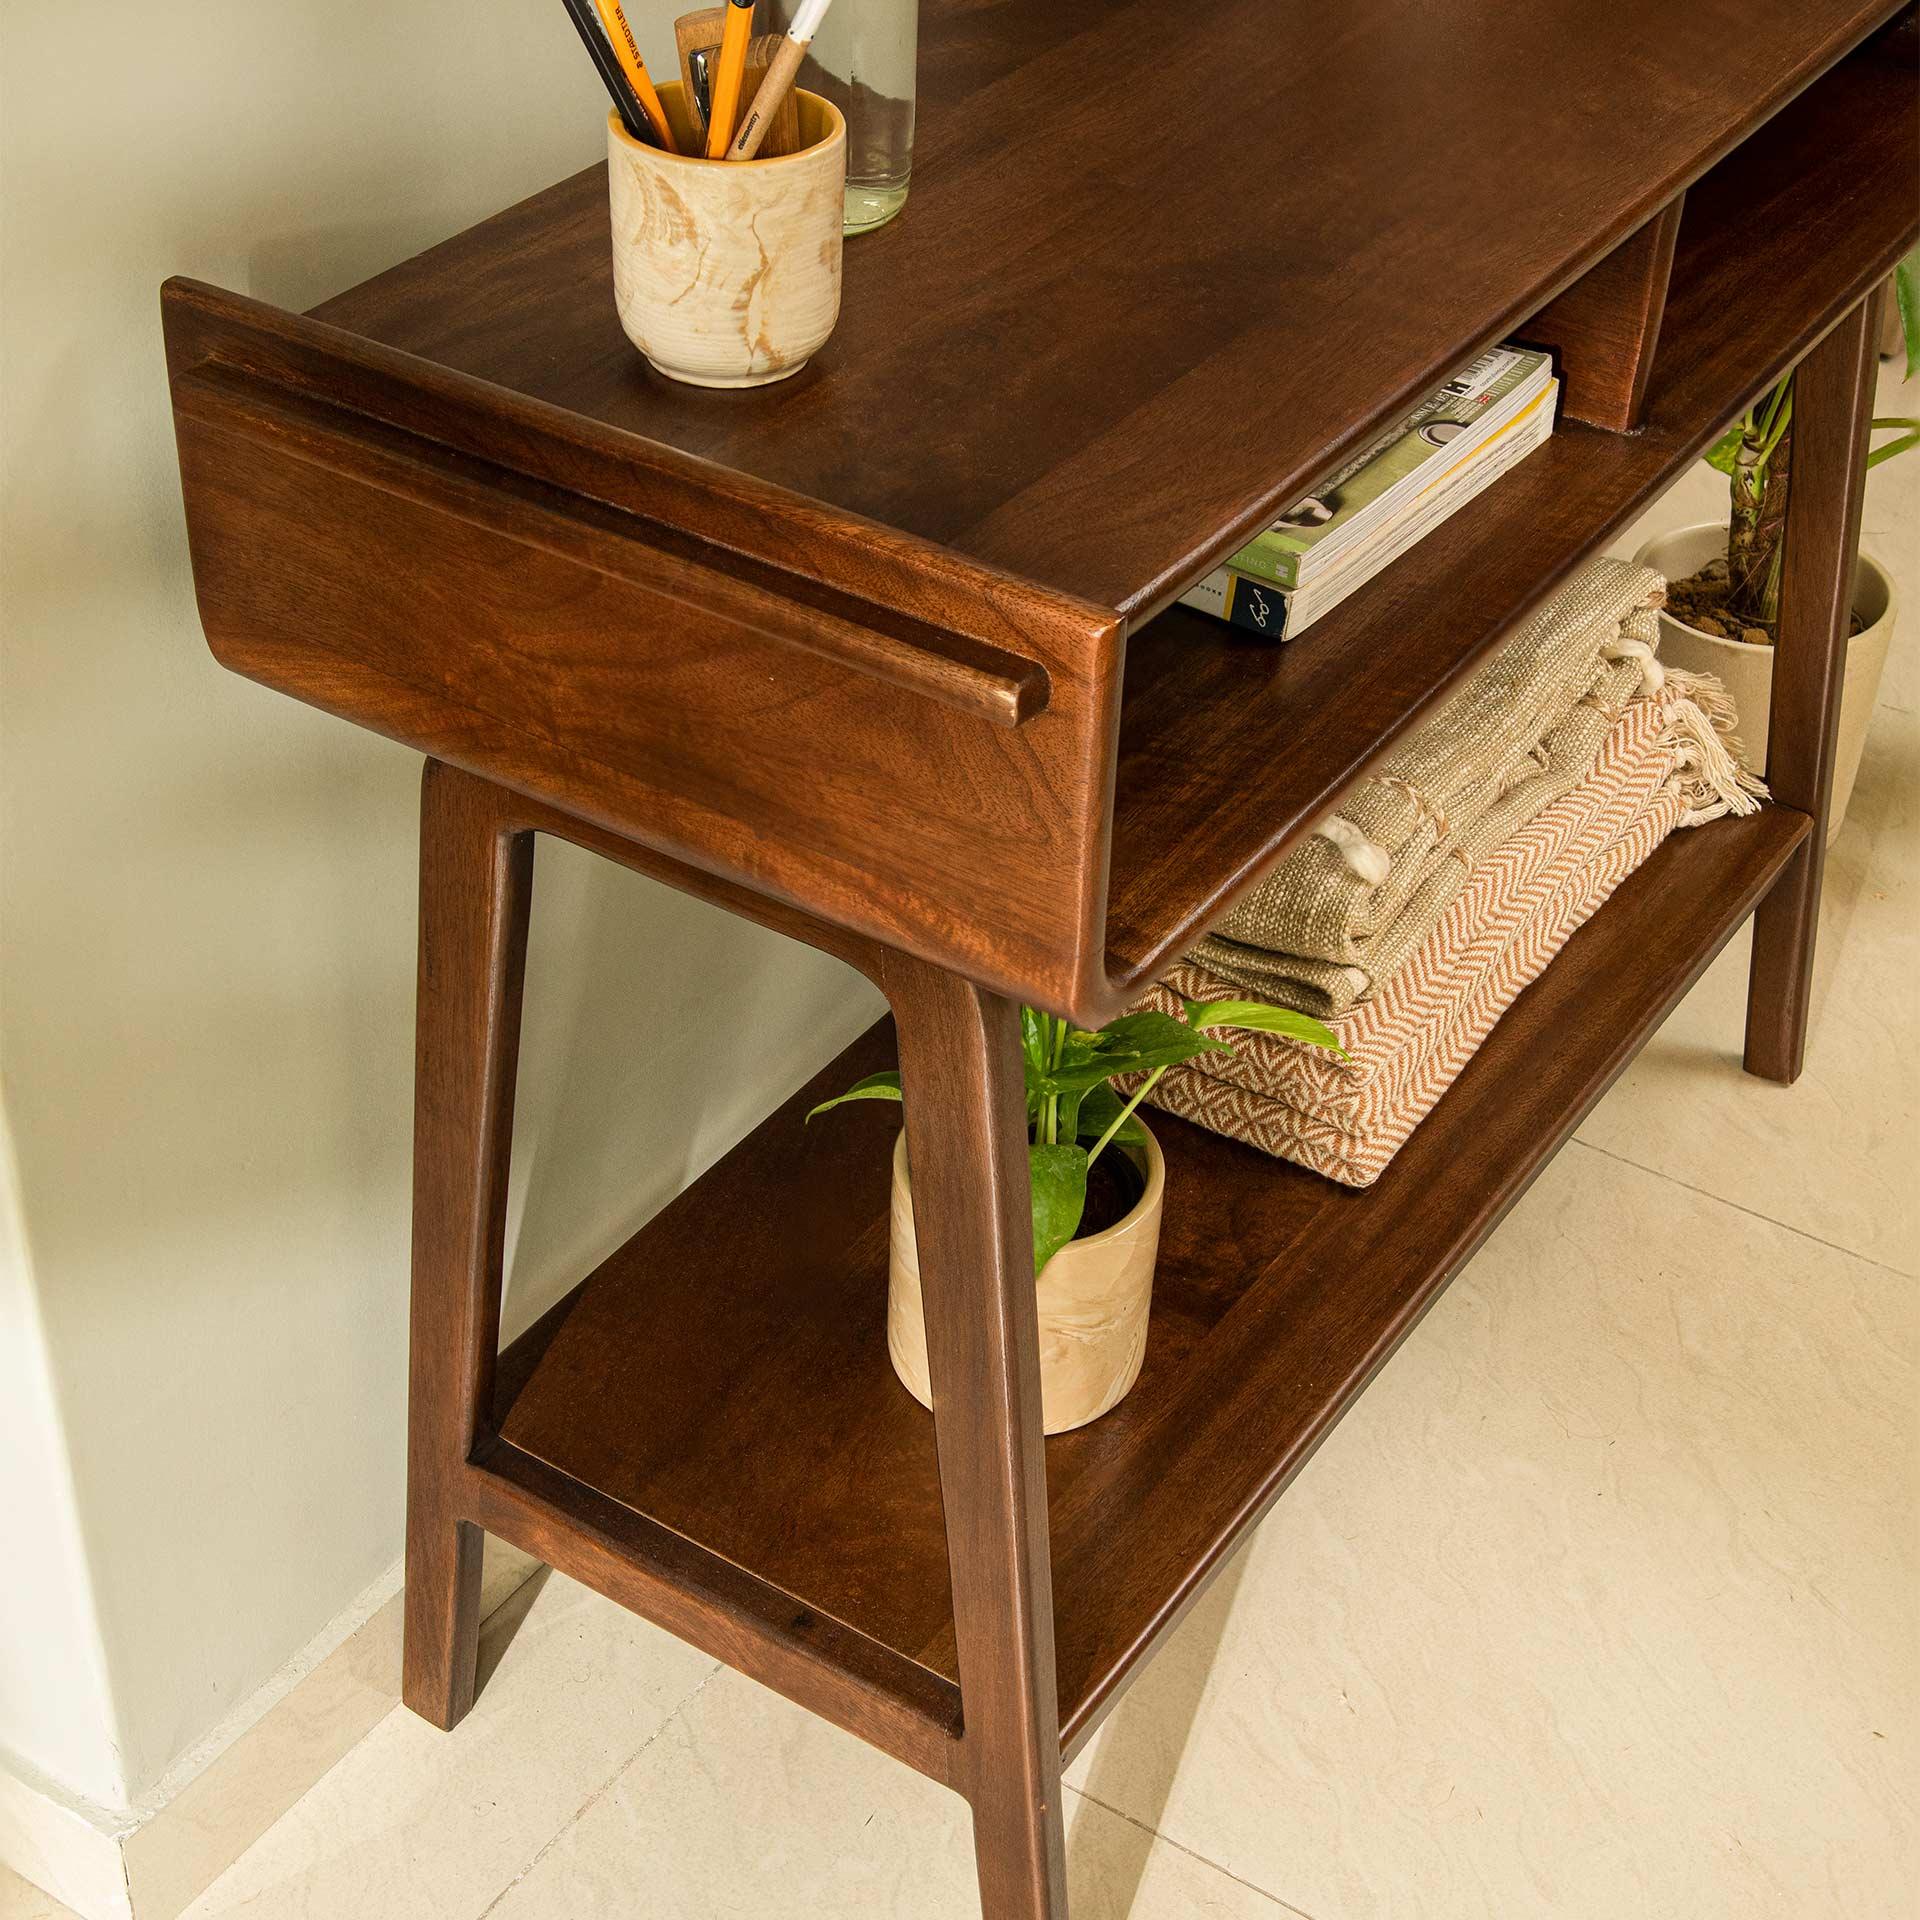 Old World ready-to-assemble console table